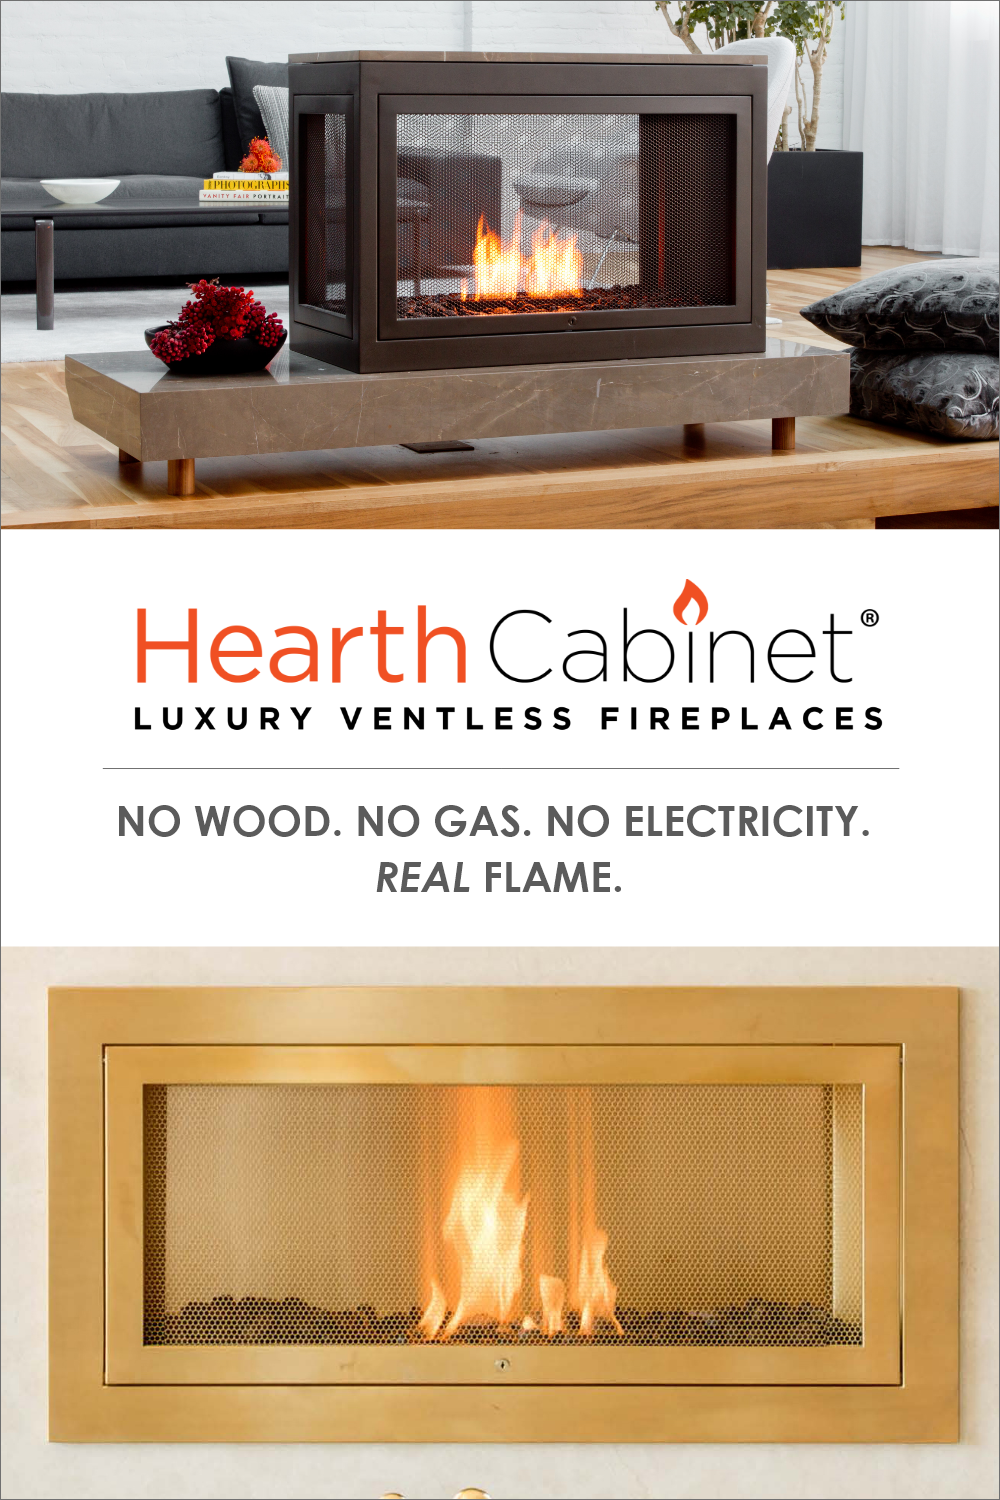 Fireplaces R Us Fresh 171 Best Residential Images In 2019